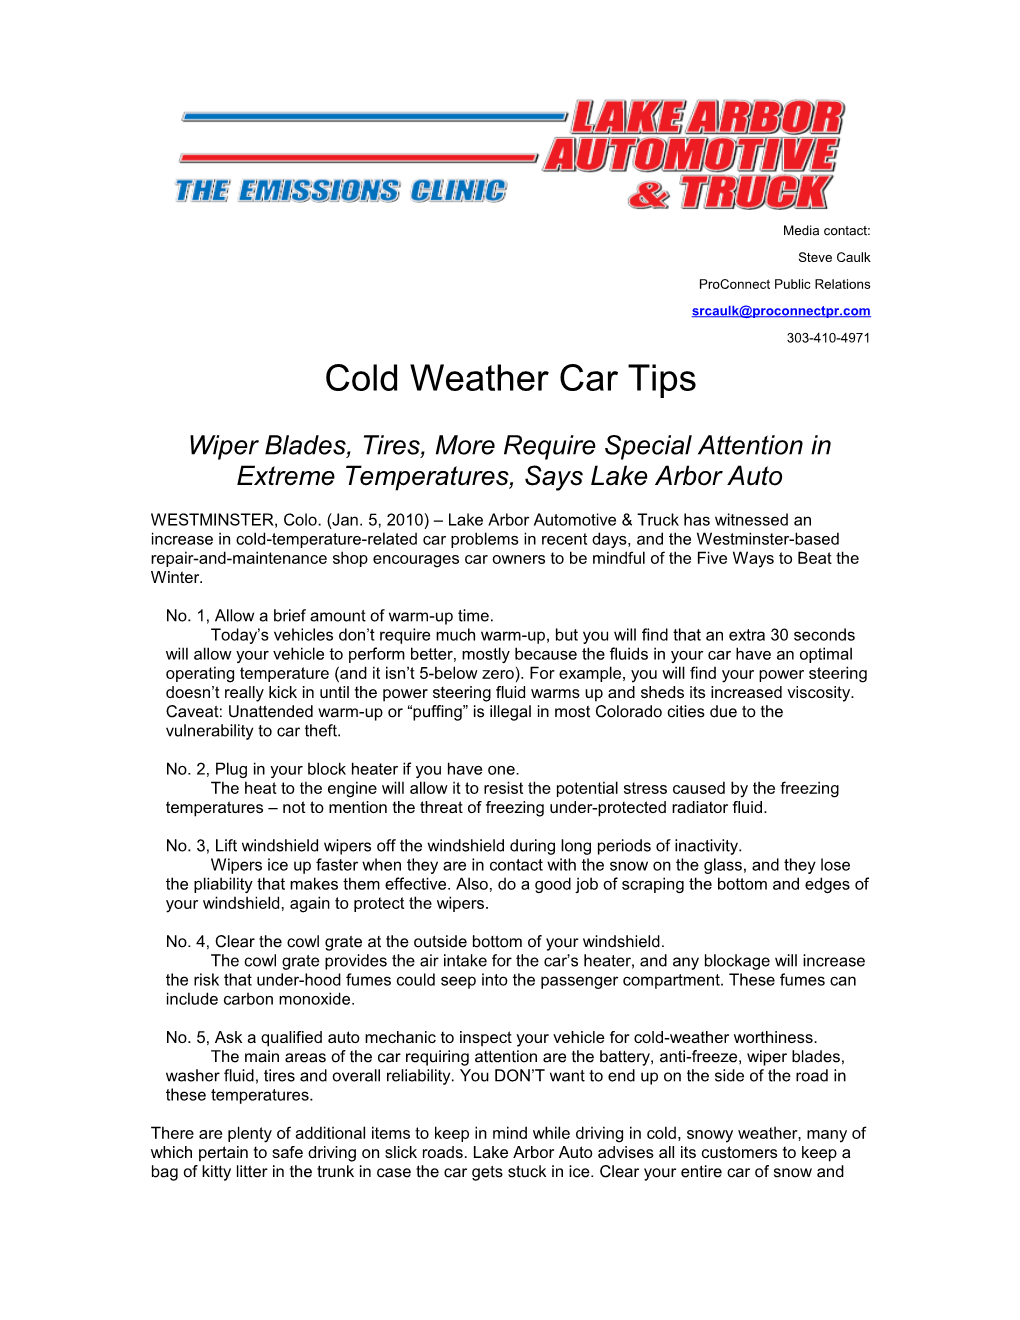 Cold Weather Car Tips